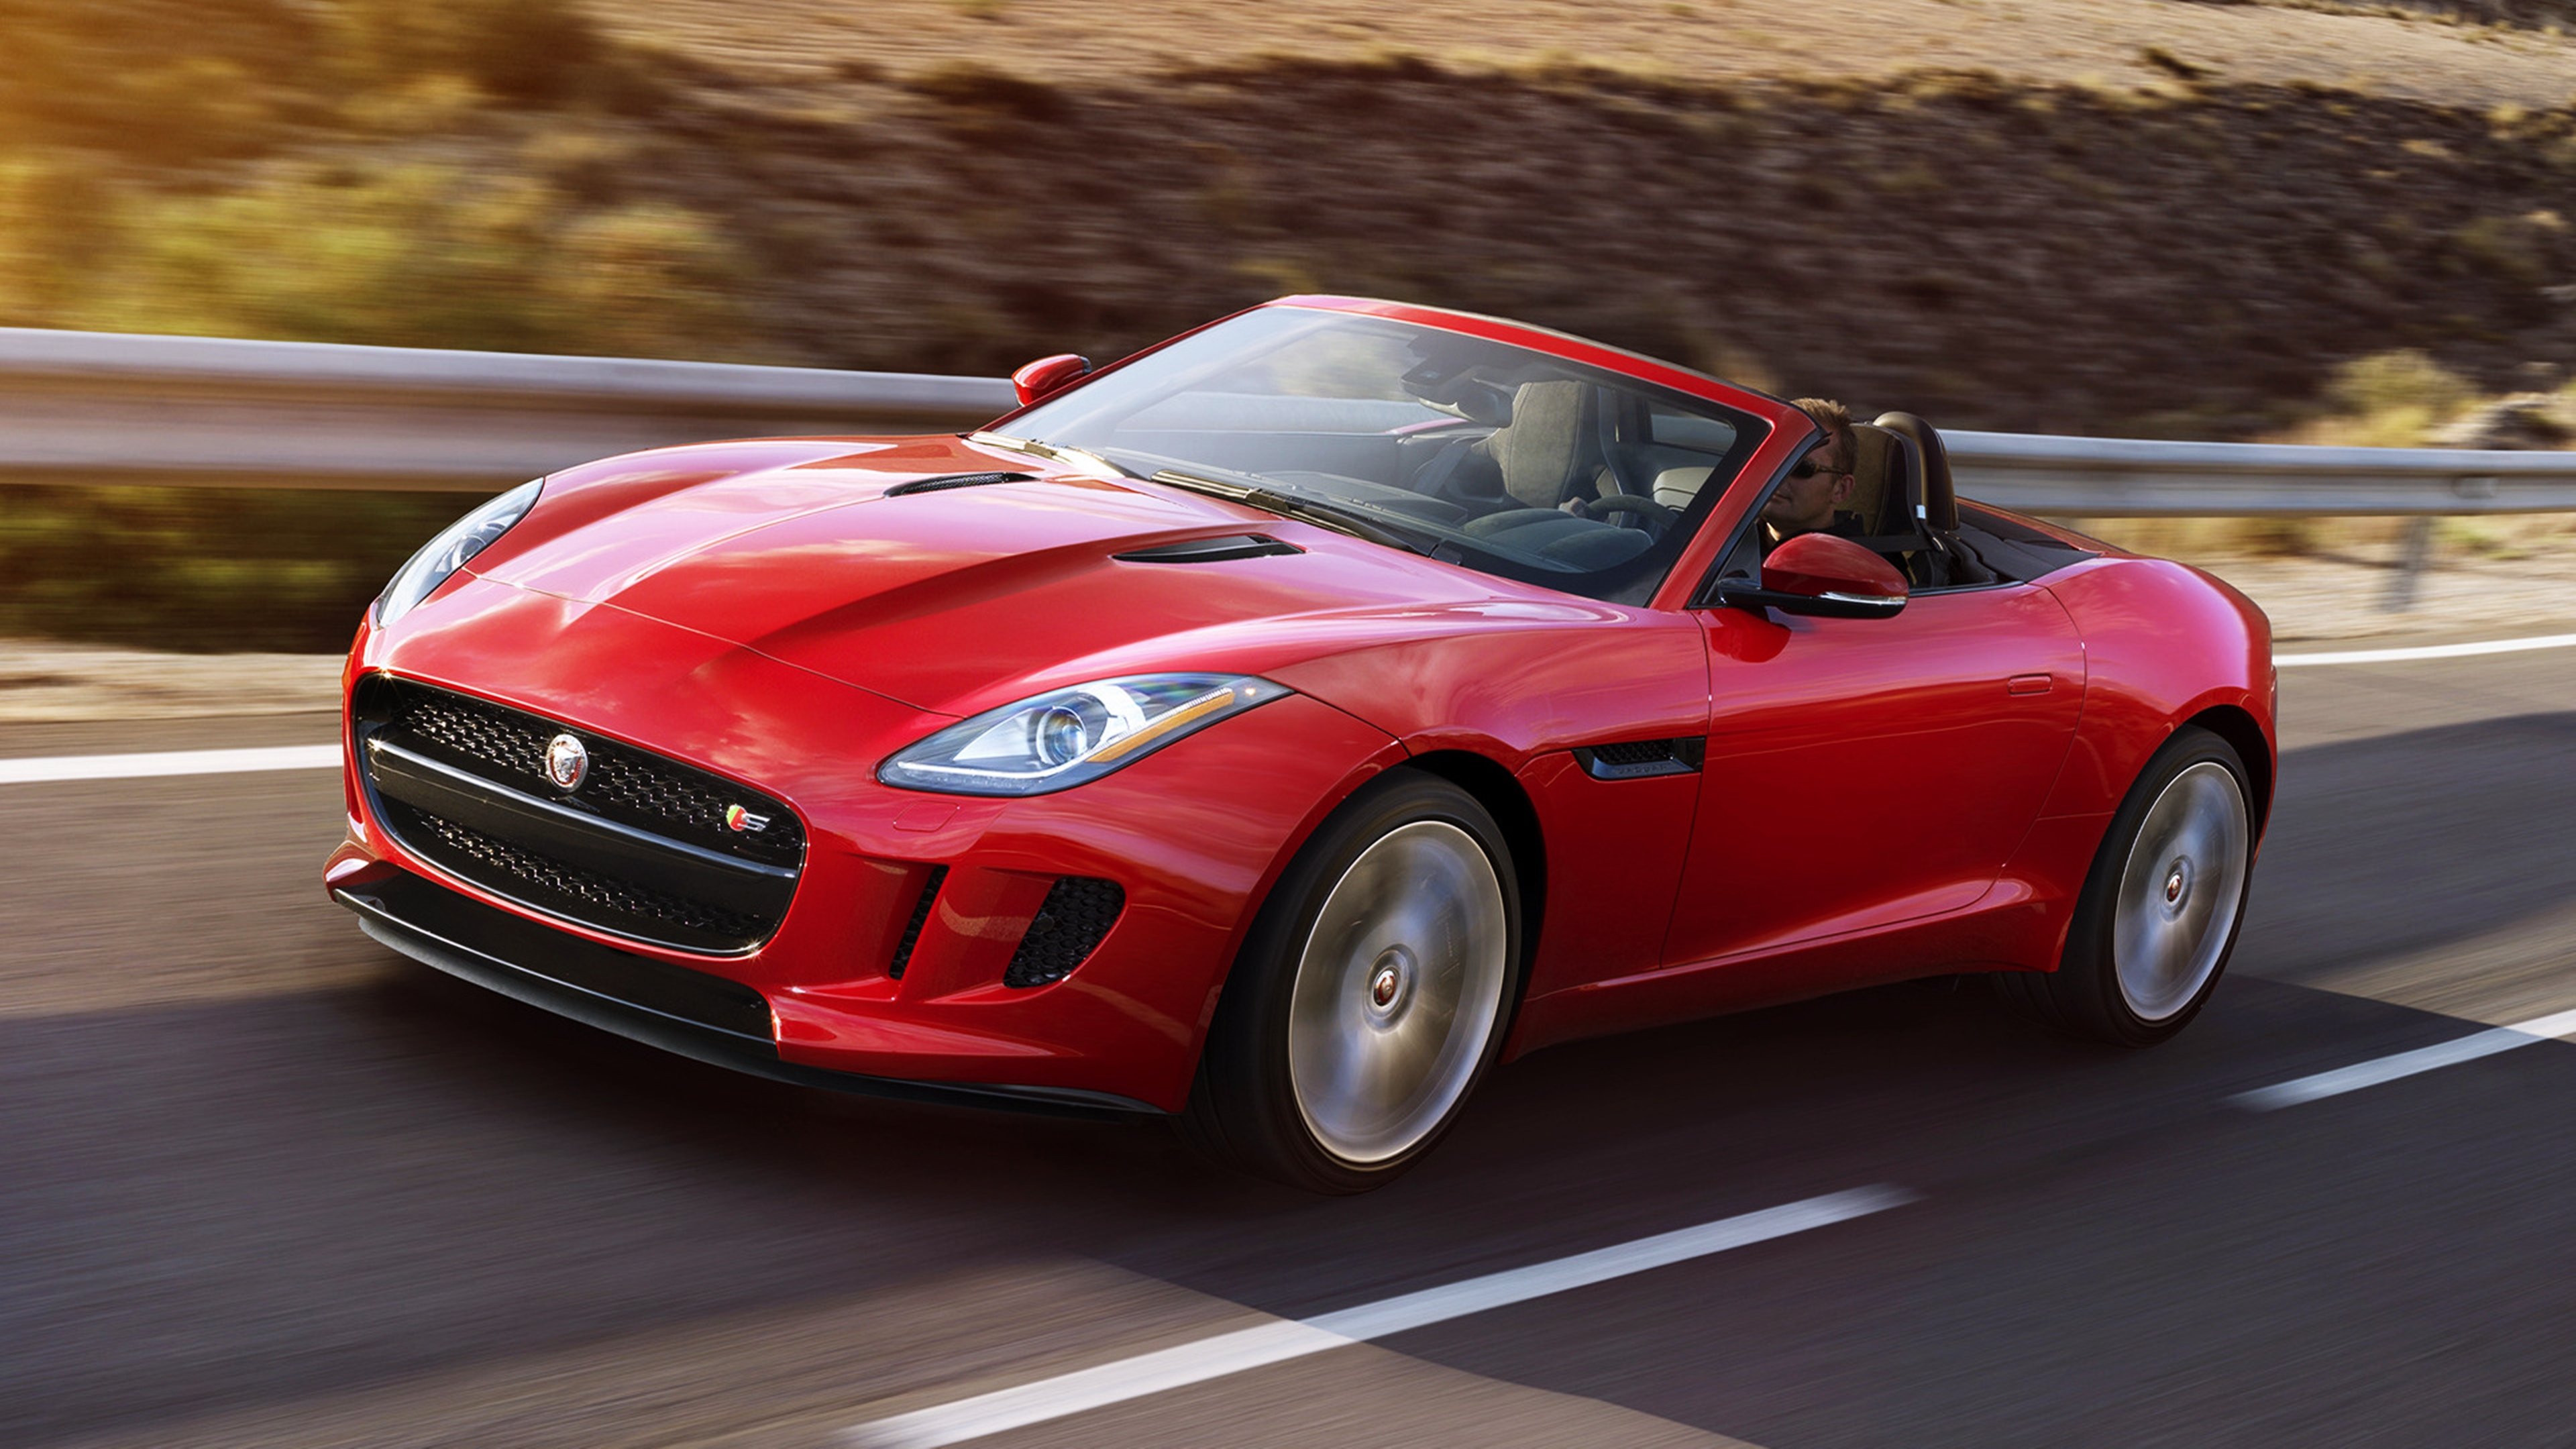 2015 Jaguar F Type S Red Cars Roof Supercars Road Speed